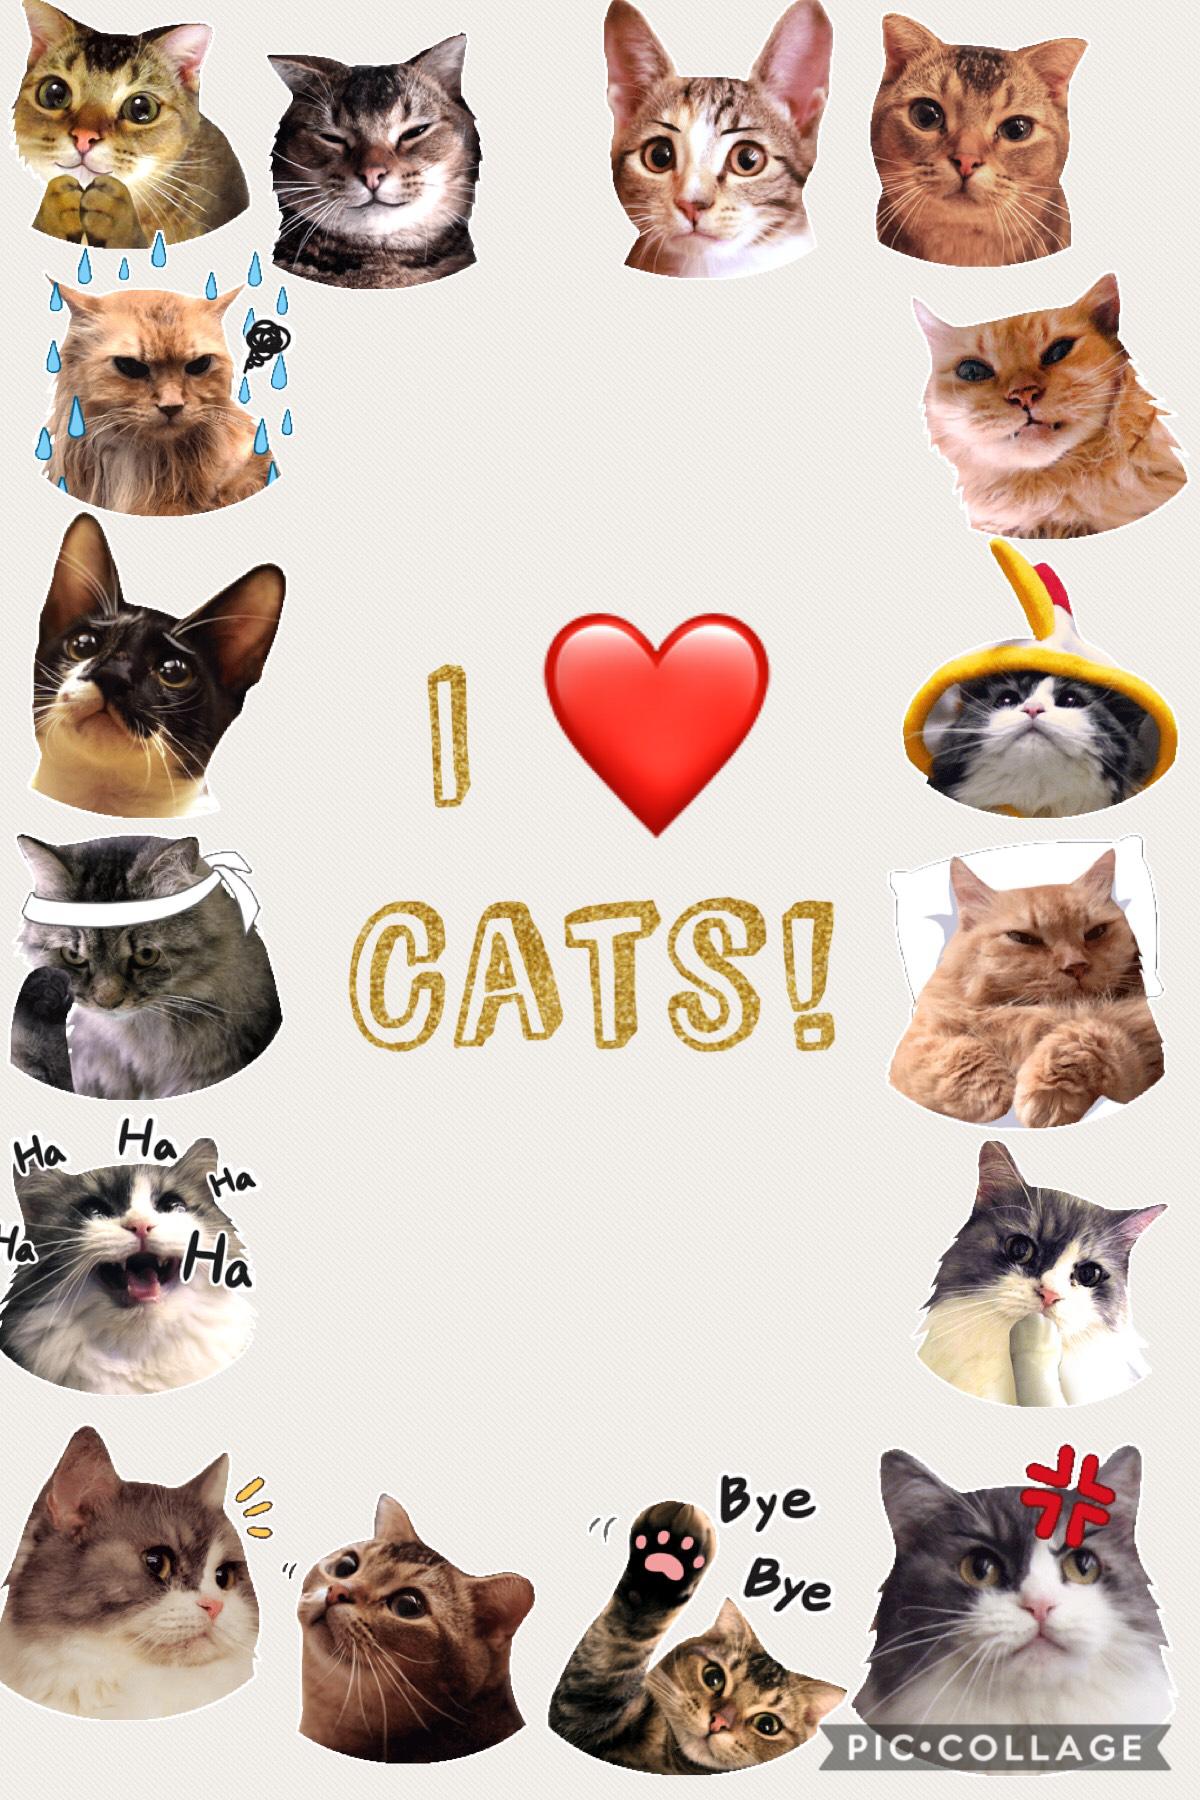 I love cats! How about u?